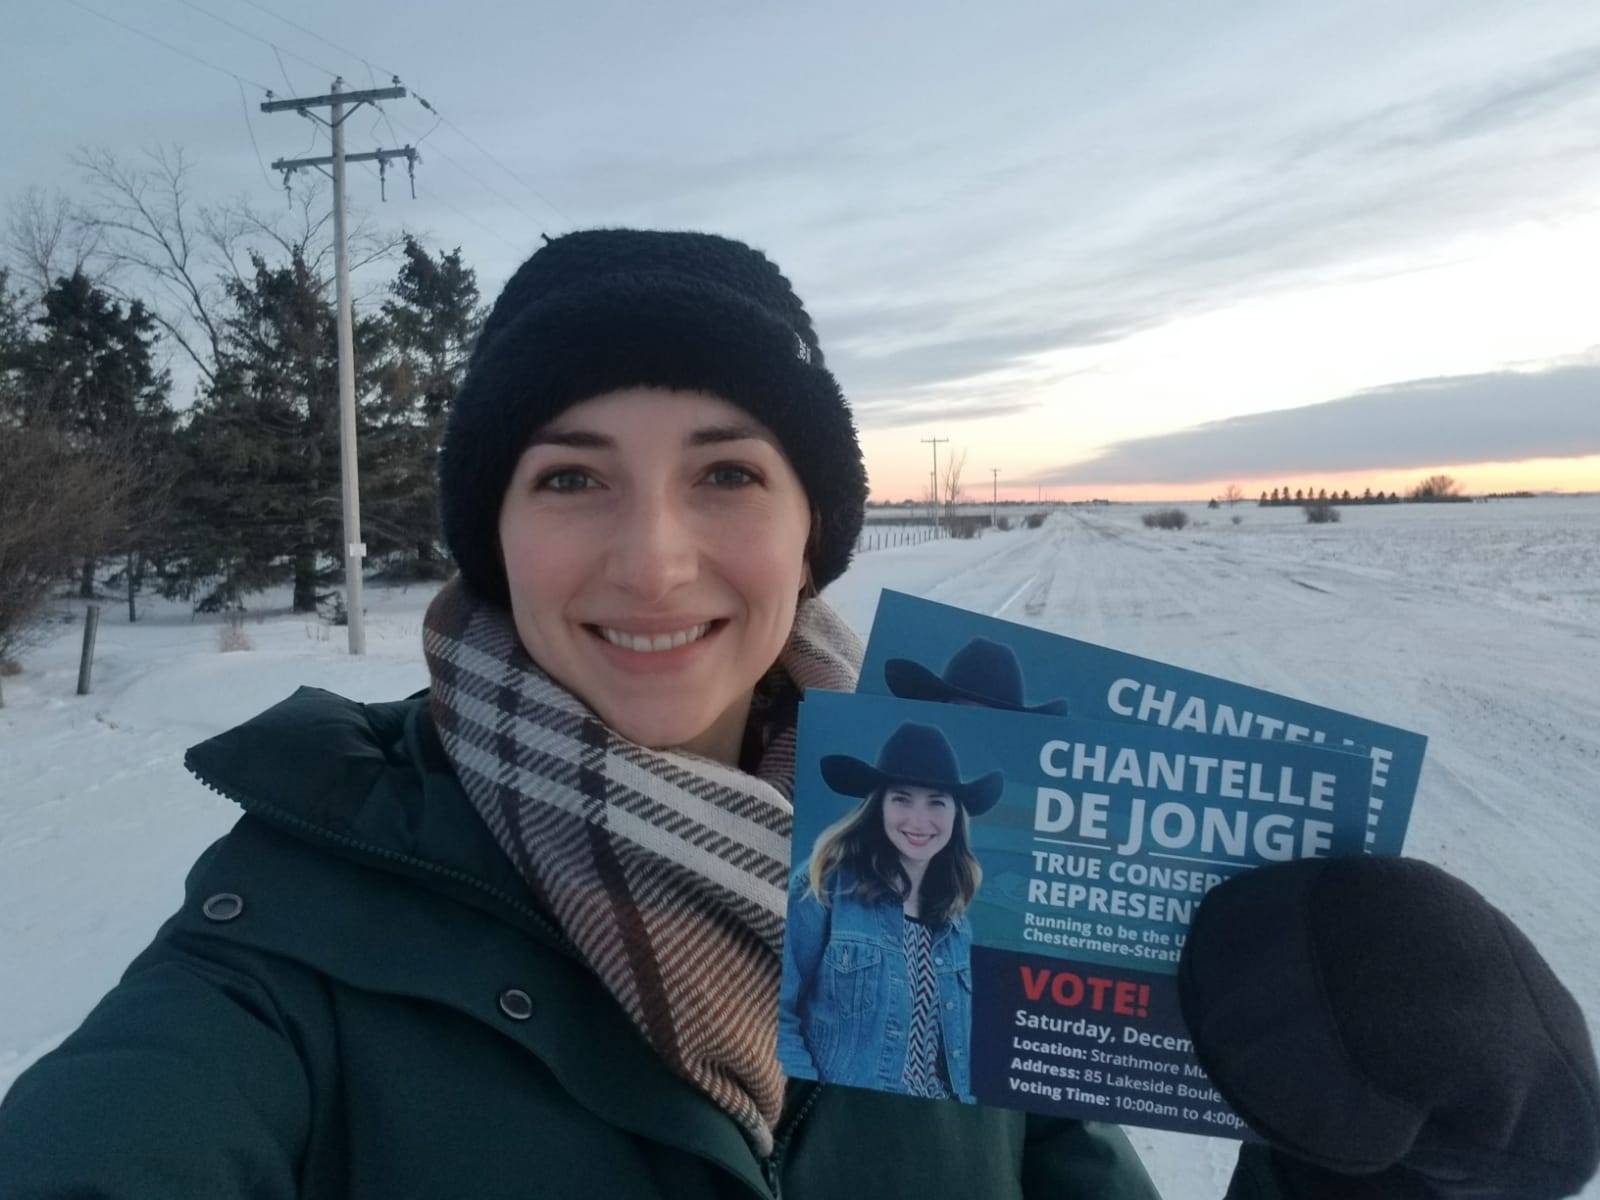 Chantelle de Jonge advocating for a strong and free Alberta - The  Chestermere Anchor